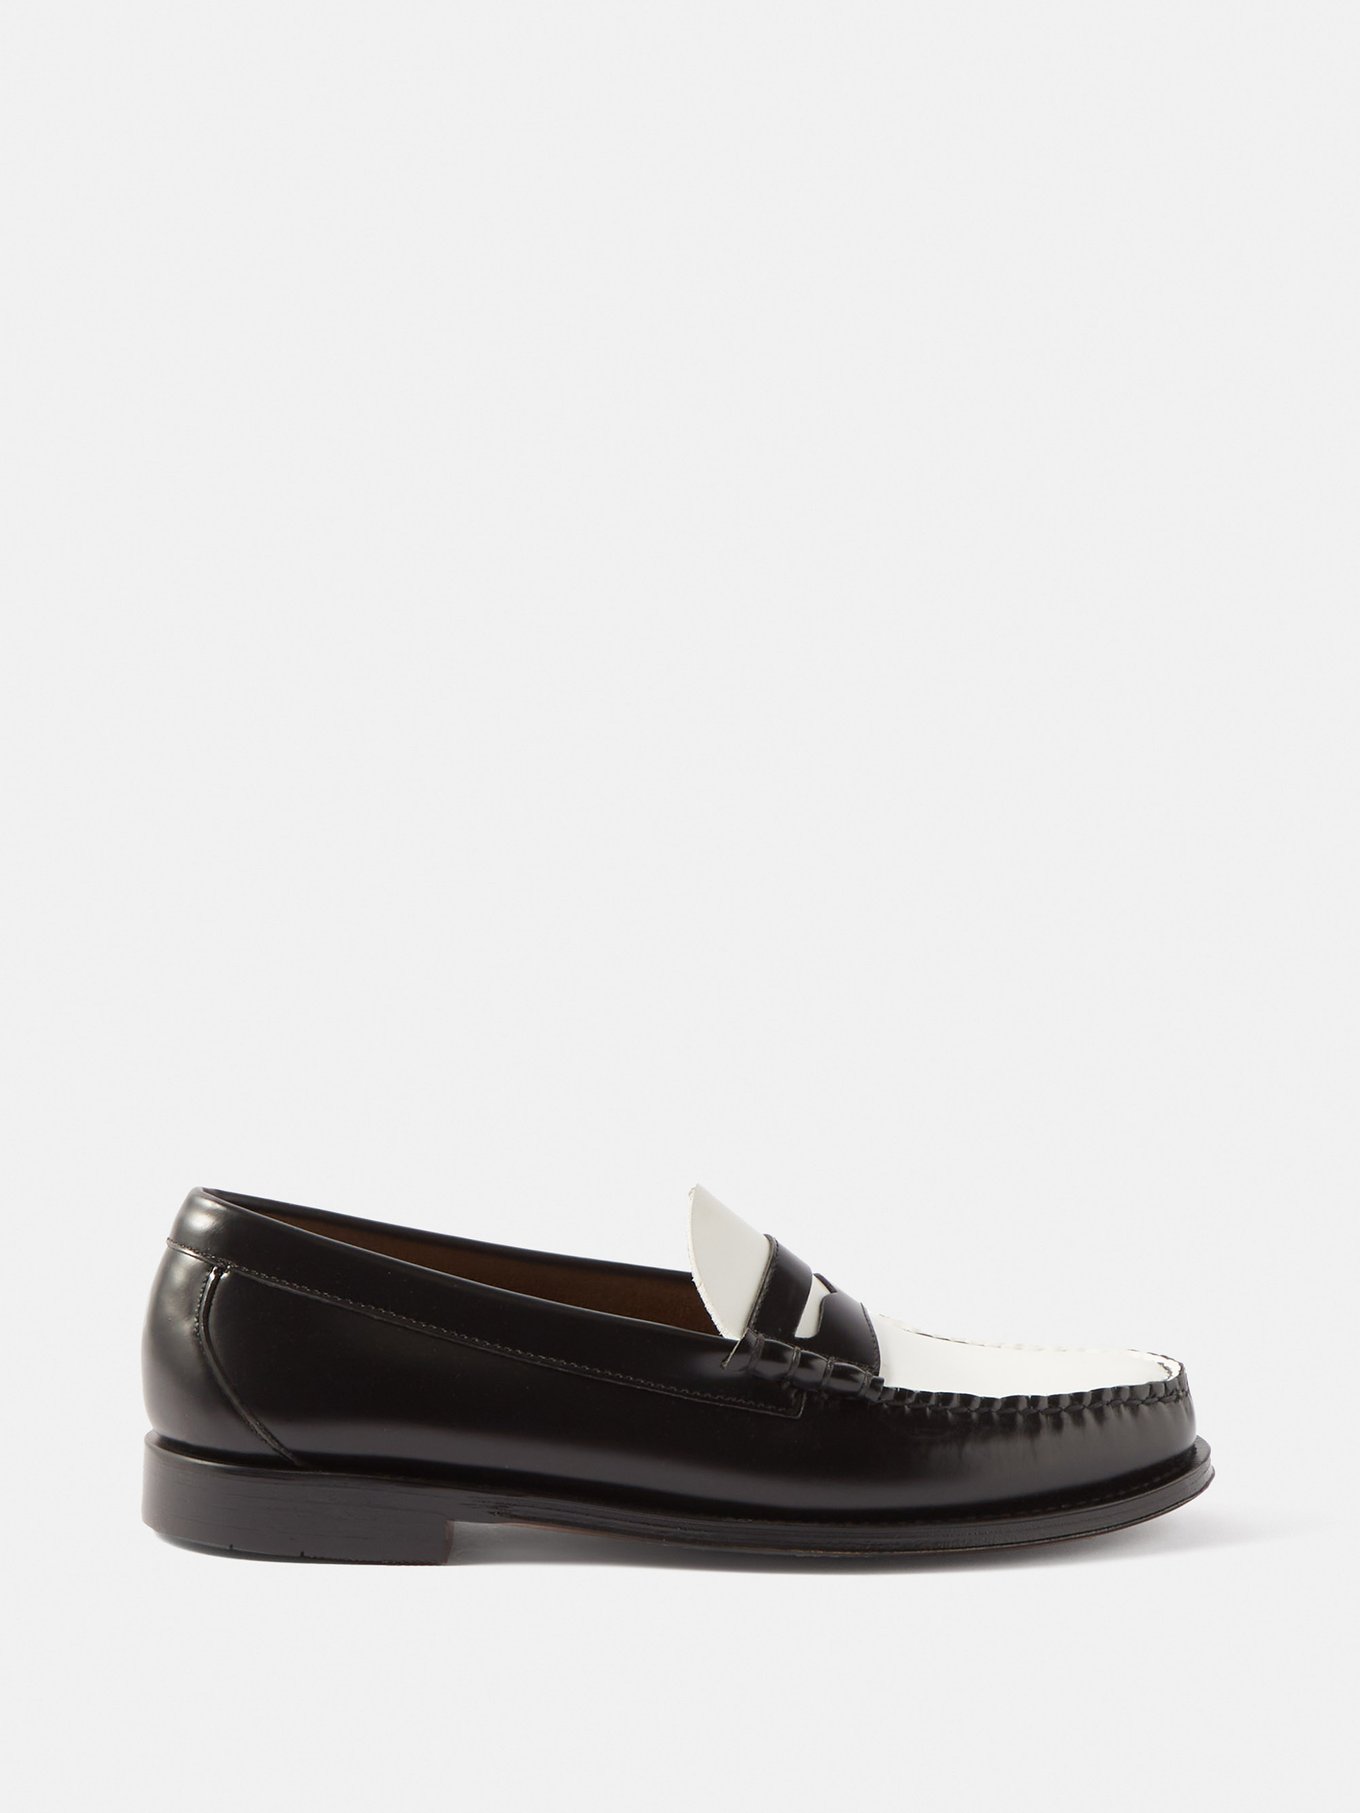 Weejuns Larson leather loafers | G.H. Bass & Co.